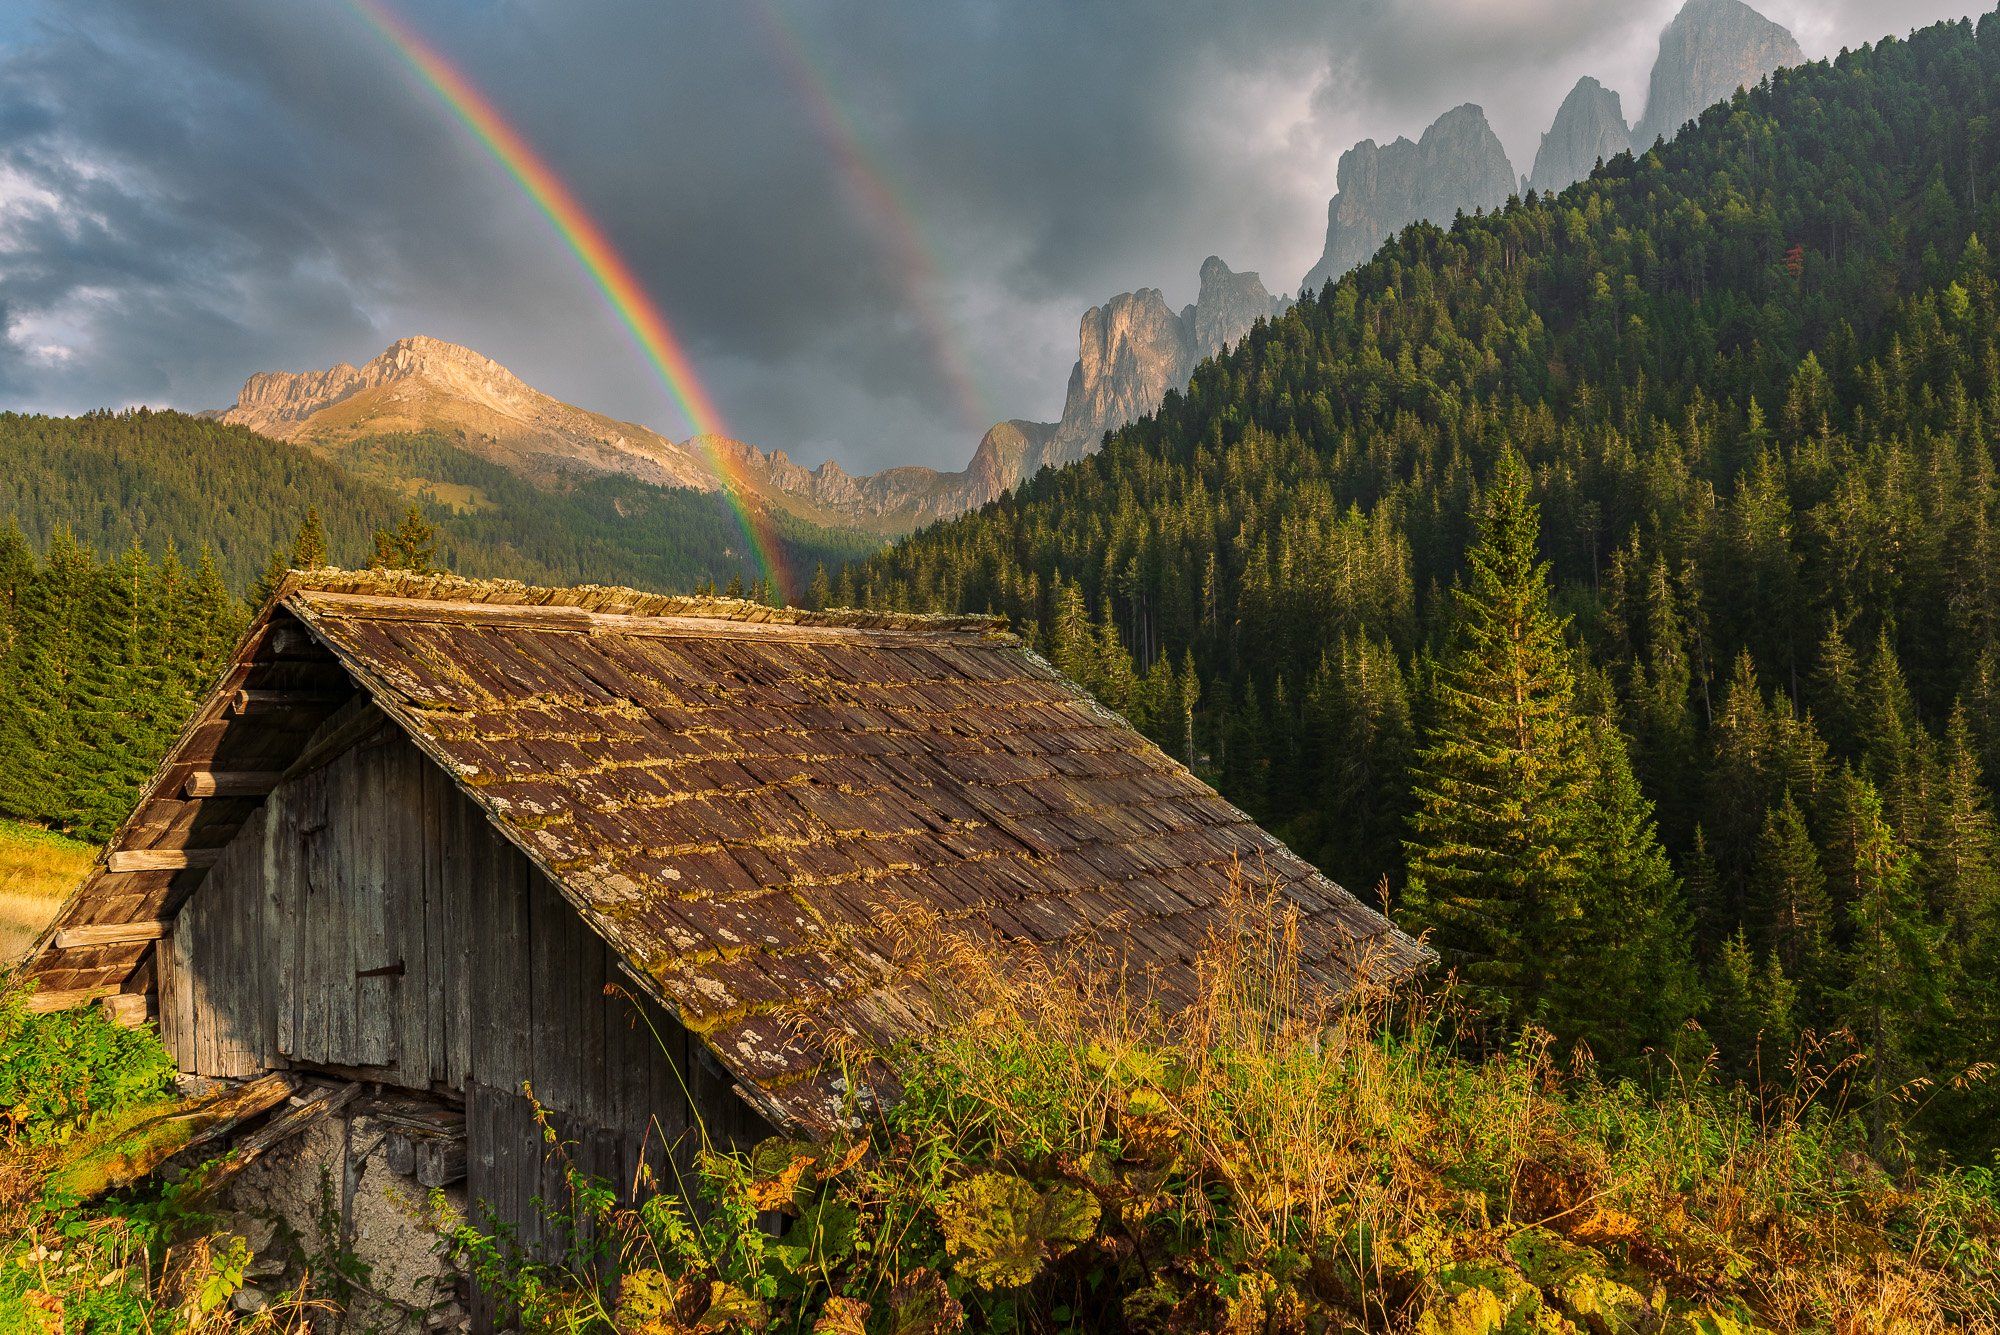 alps,autumn,background,barn wood,clouds,dolomites,forest,grass,hill,home,house,italy,landscape,meadow,mountain,nature,outdoor,rainbow,rock,rural,scenic,sky,tourism,travel,vacation,valley,view, Косарев Борис